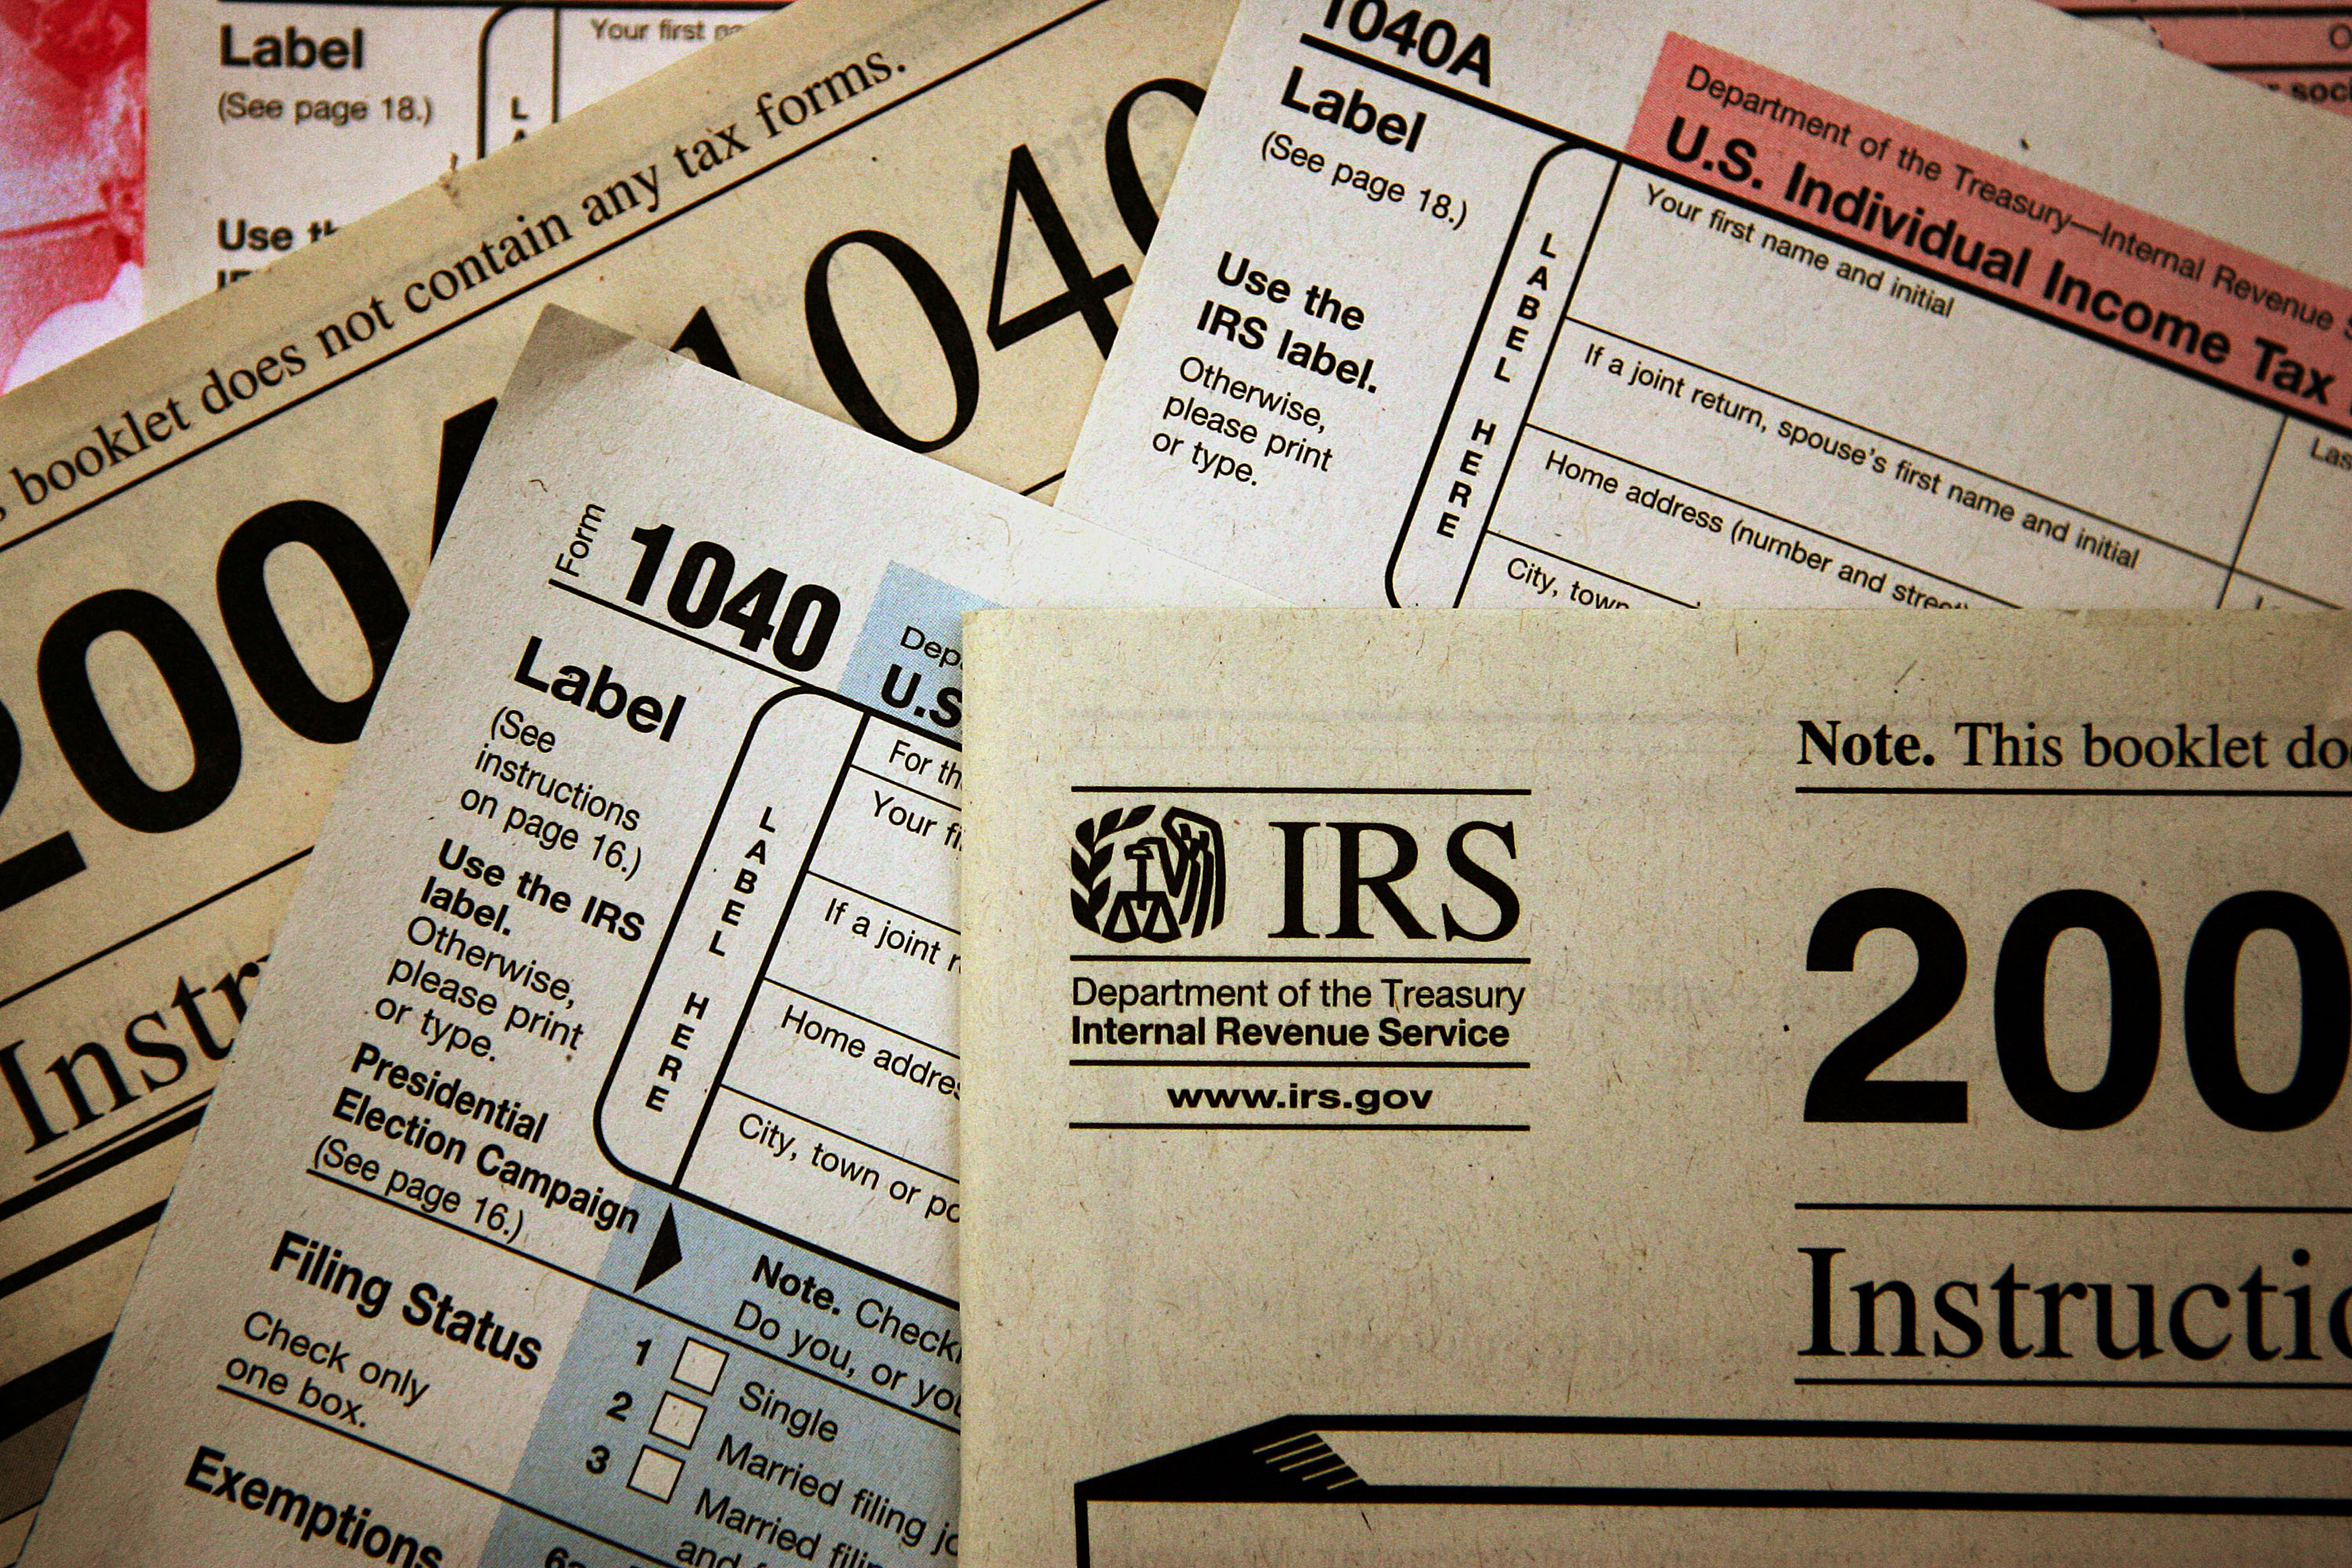 800,000 people have until October to file taxes because the IRS sent them the wrong form